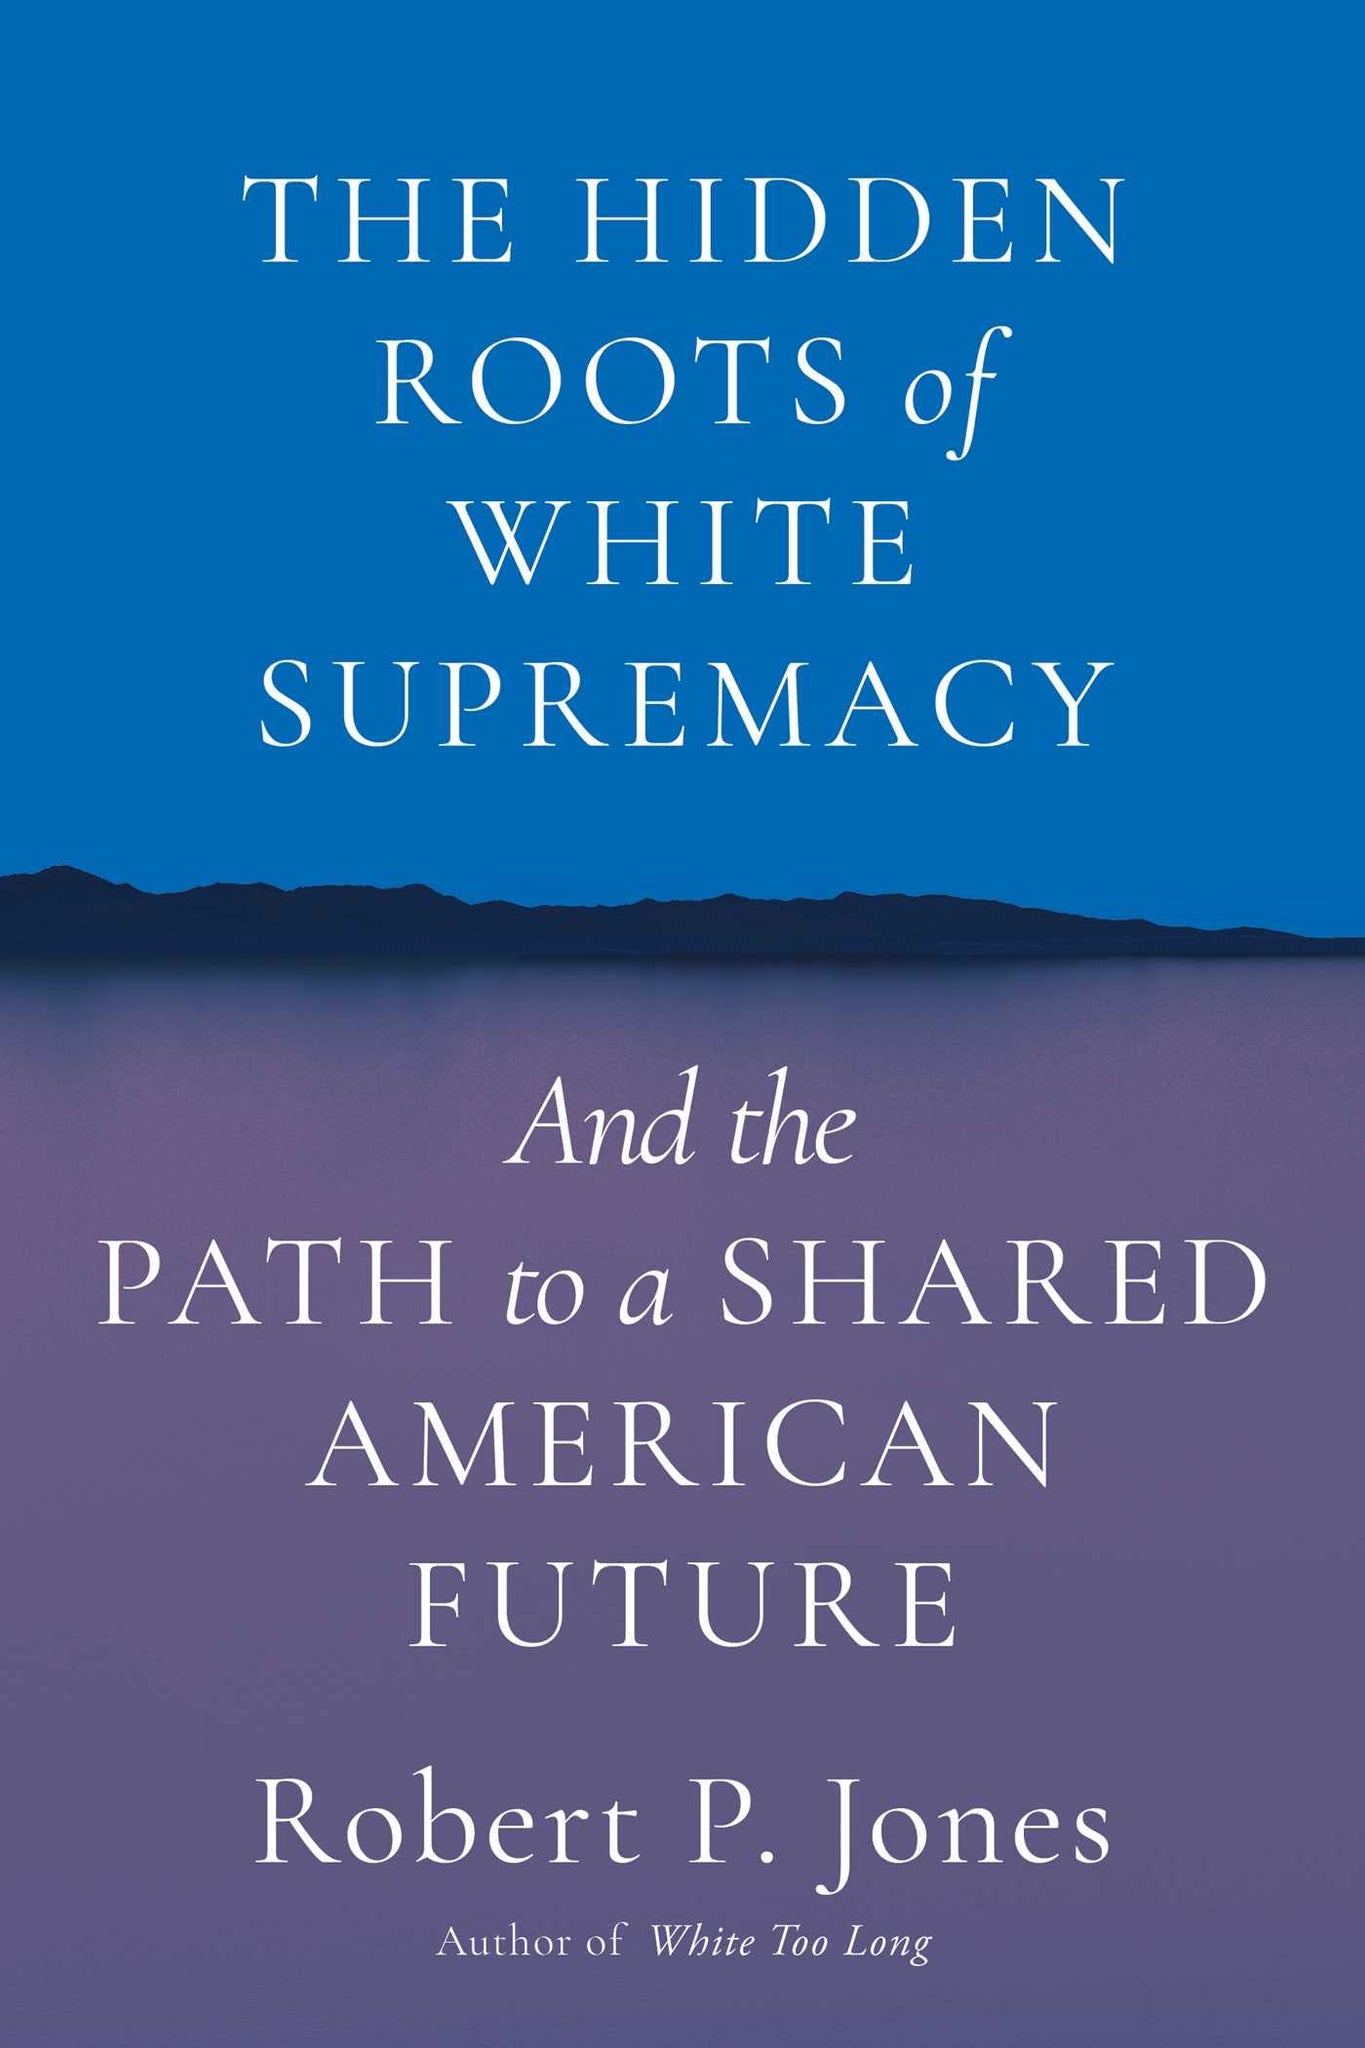 The Hidden Roots of White Supremacy: And the Path to a Shared American Future (Hardcover)